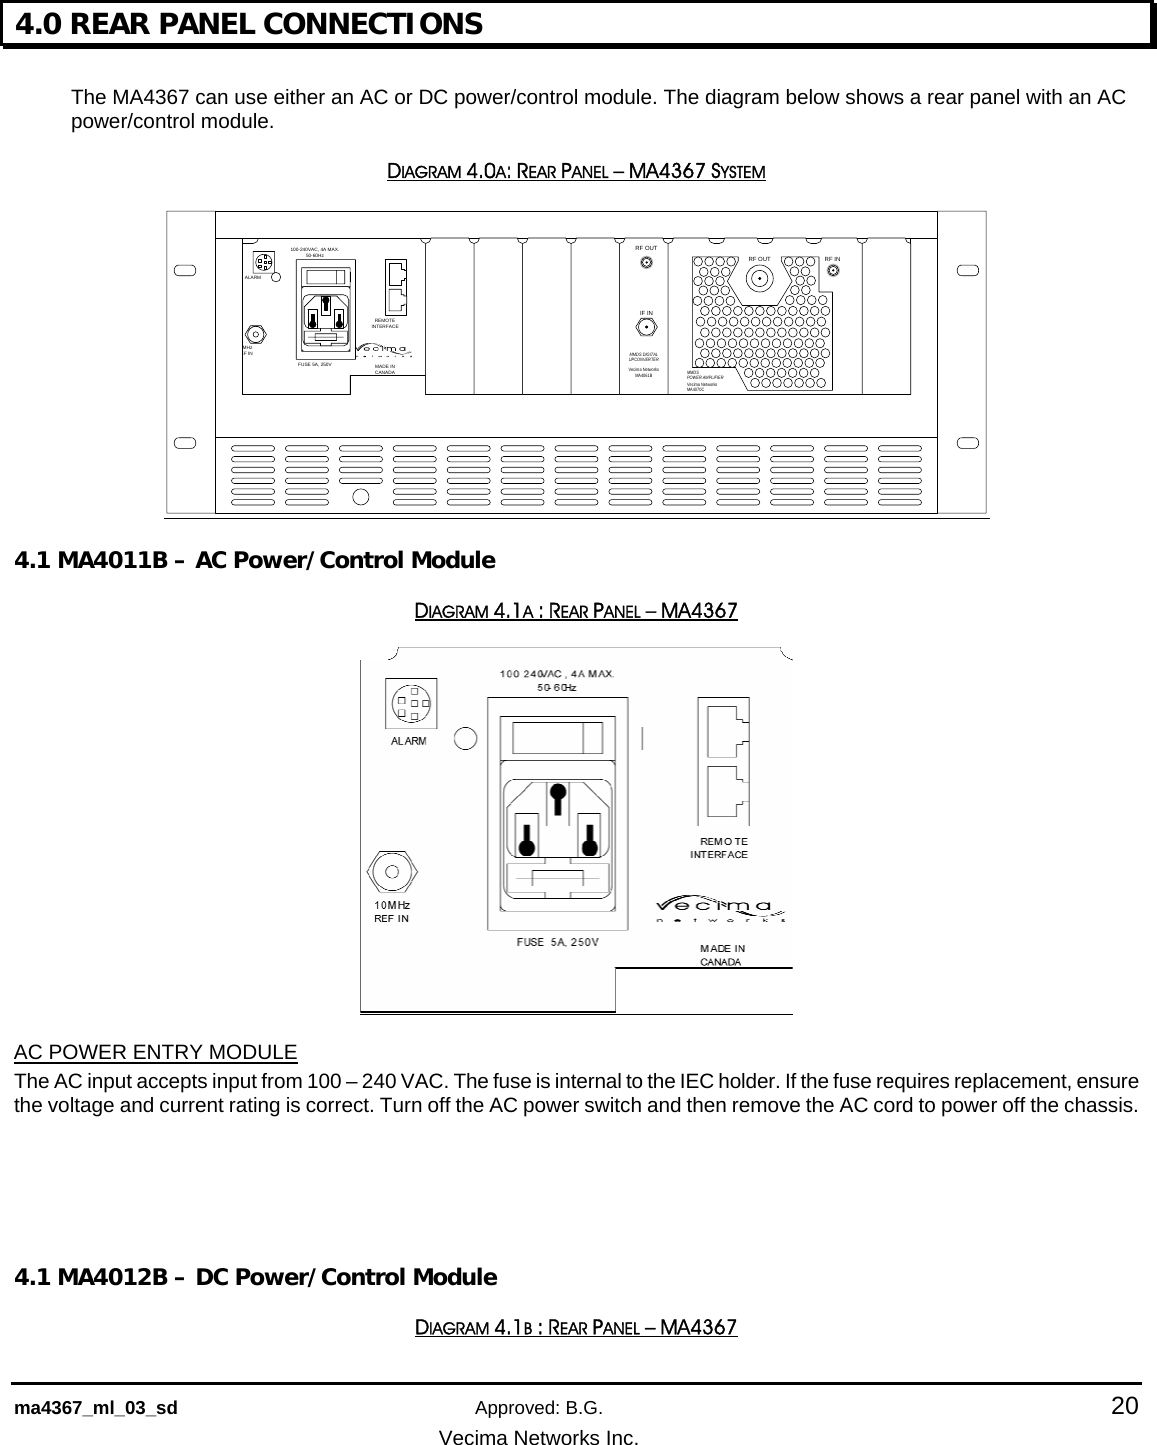    ma4367_ml_03_sd Approved: B.G.  20   Vecima Networks Inc. 4.0 REAR PANEL CONNECTIONS  The MA4367 can use either an AC or DC power/control module. The diagram below shows a rear panel with an AC power/control module. DIAGRAM 4.0A: REAR PANEL – MA4367 SYSTEM REMOTEINTERFACEMADE IN CANADA100-240VAC, 4A MAX.50-60HzFUSE 5A, 250VALARM10MHzREF INRF OUTIF INMMDS DIGITALUPCONVERTERVecima NetworksMA4061BRF OUT RF INMMDSPOWER AMPLIFIERVecima NetworksMA4070C 4.1 MA4011B – AC Power/Control Module DIAGRAM 4.1A : REAR PANEL – MA4367  AC POWER ENTRY MODULE  The AC input accepts input from 100 – 240 VAC. The fuse is internal to the IEC holder. If the fuse requires replacement, ensure the voltage and current rating is correct. Turn off the AC power switch and then remove the AC cord to power off the chassis.     4.1 MA4012B – DC Power/Control Module DIAGRAM 4.1B : REAR PANEL – MA4367 